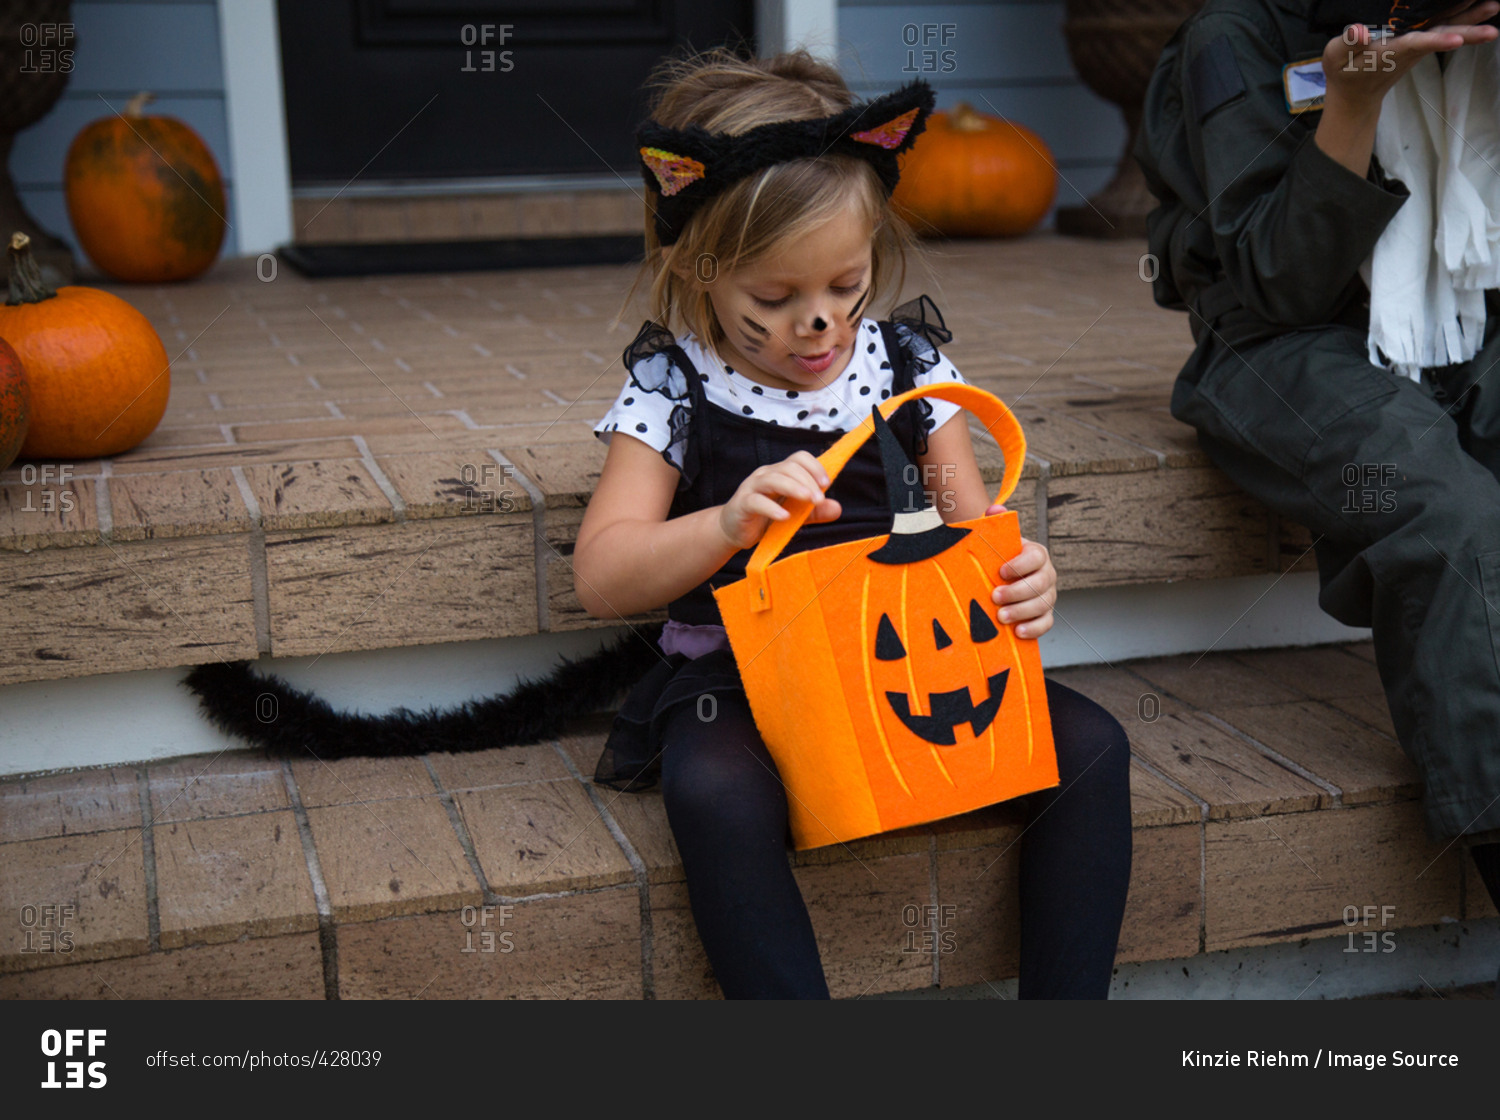 Girl in cat costume peering into trick or treating bag on porch stairway